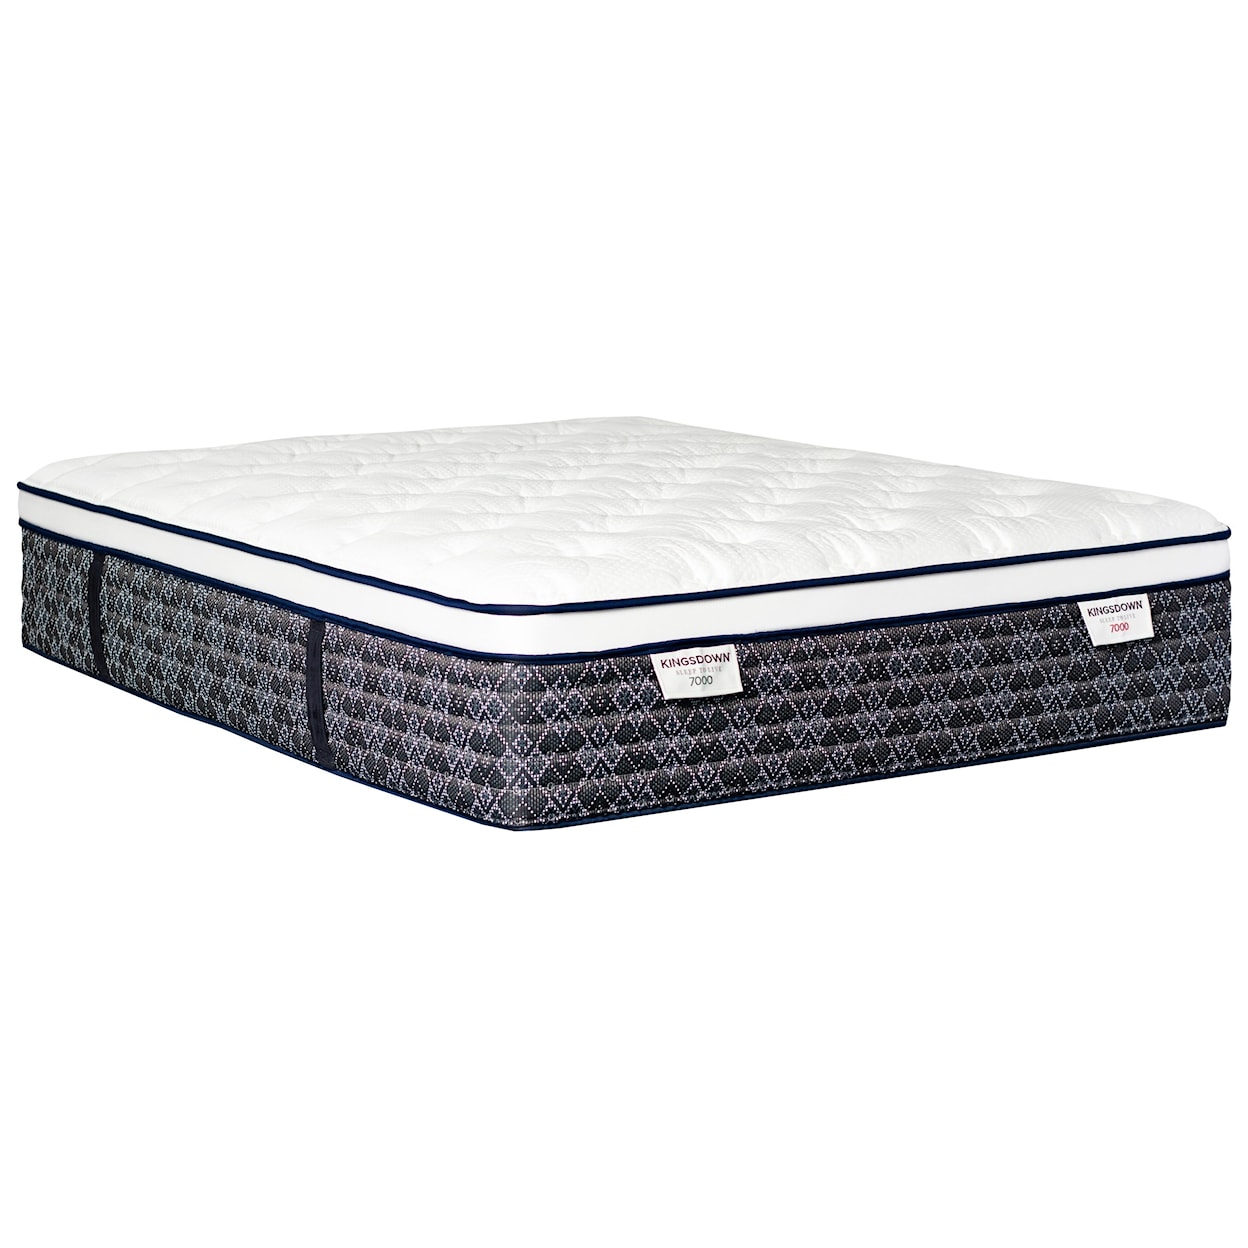 Kingsdown Sleep to Live 7000 Green Red ET King Pocketed Coil Mattress